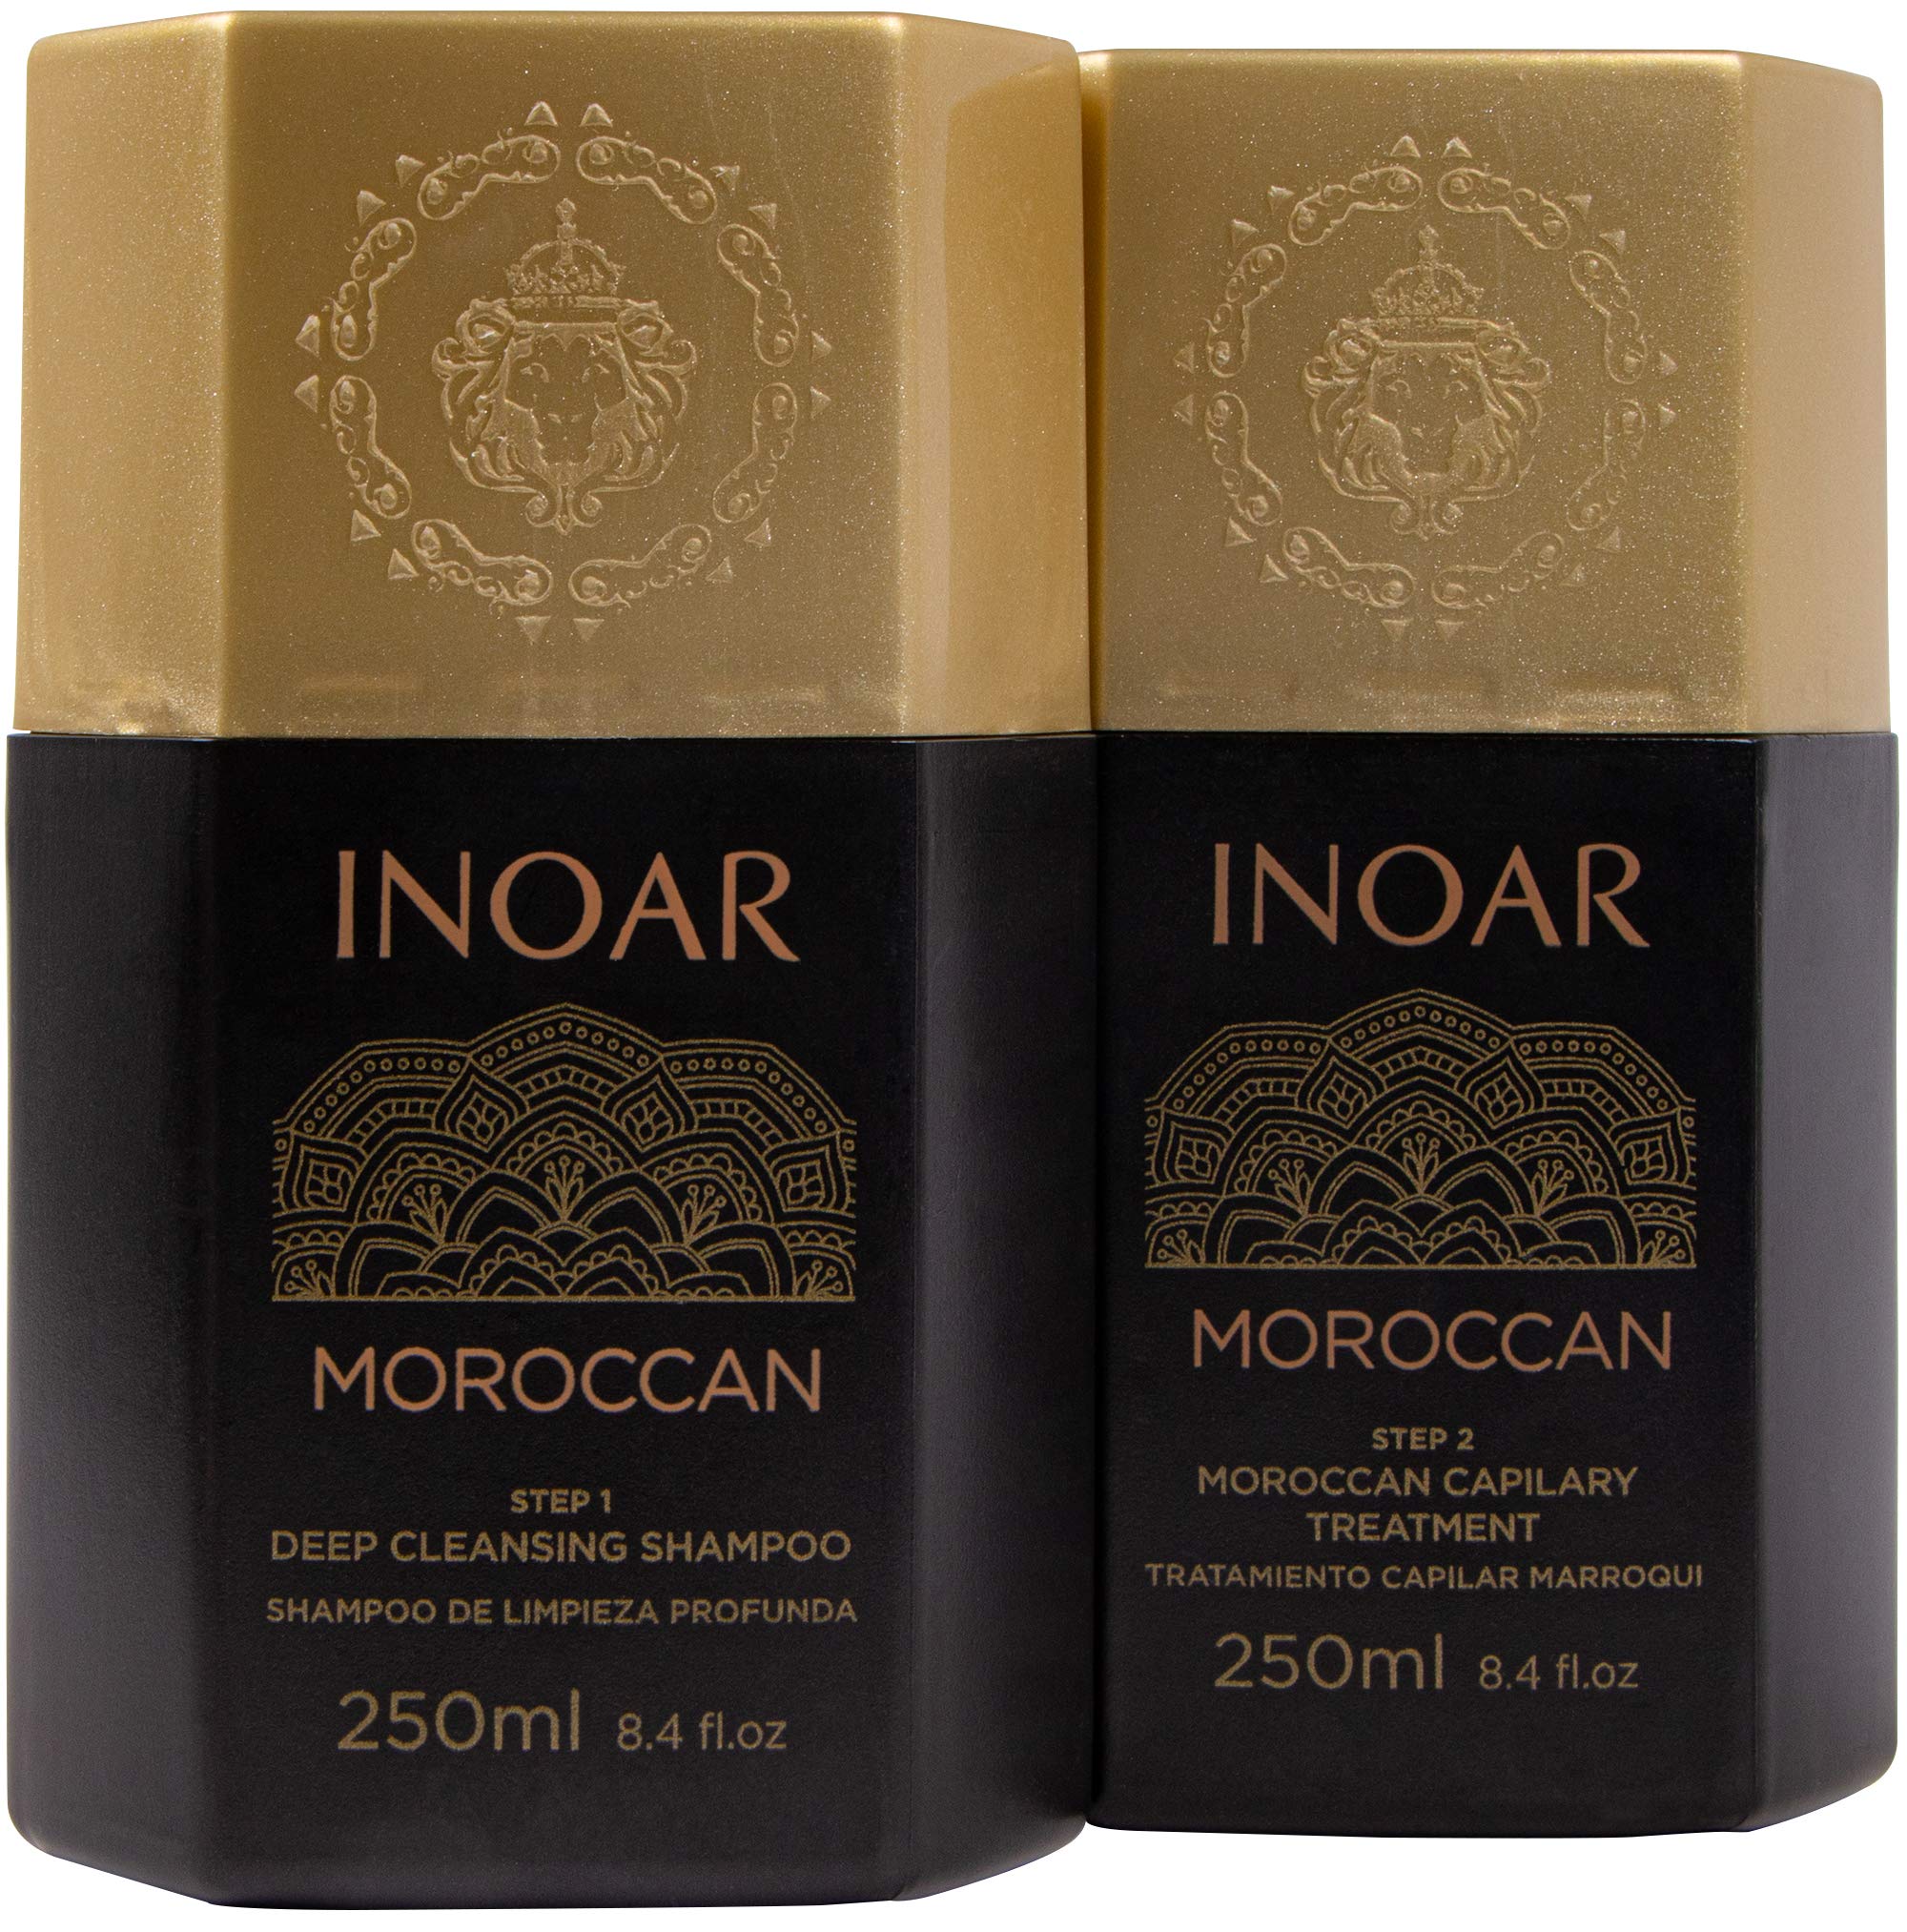 INOAR – Moroccan Keratin Smoothing Treatment Set - Deep Cleansing Shampoo & Moroccan Keratin Treatment - Curly Hair Care, Vegan Hair Product - Cruelty Free Haircare for Men and Women (8.4 oz. each)